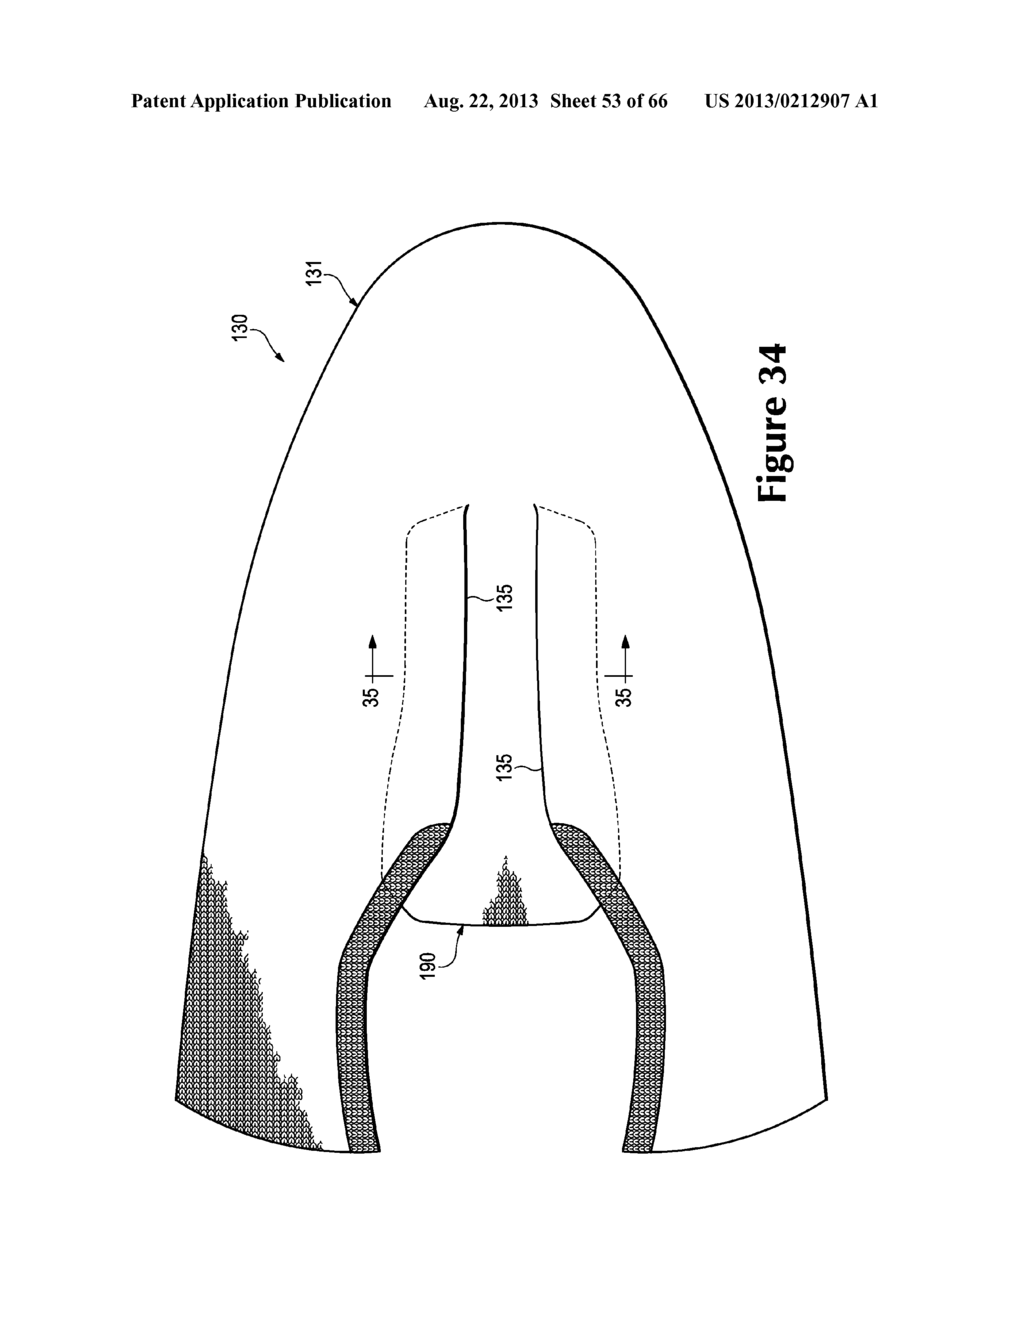 Article Of Footwear Incorporating A Knitted Component With A Tongue - diagram, schematic, and image 54